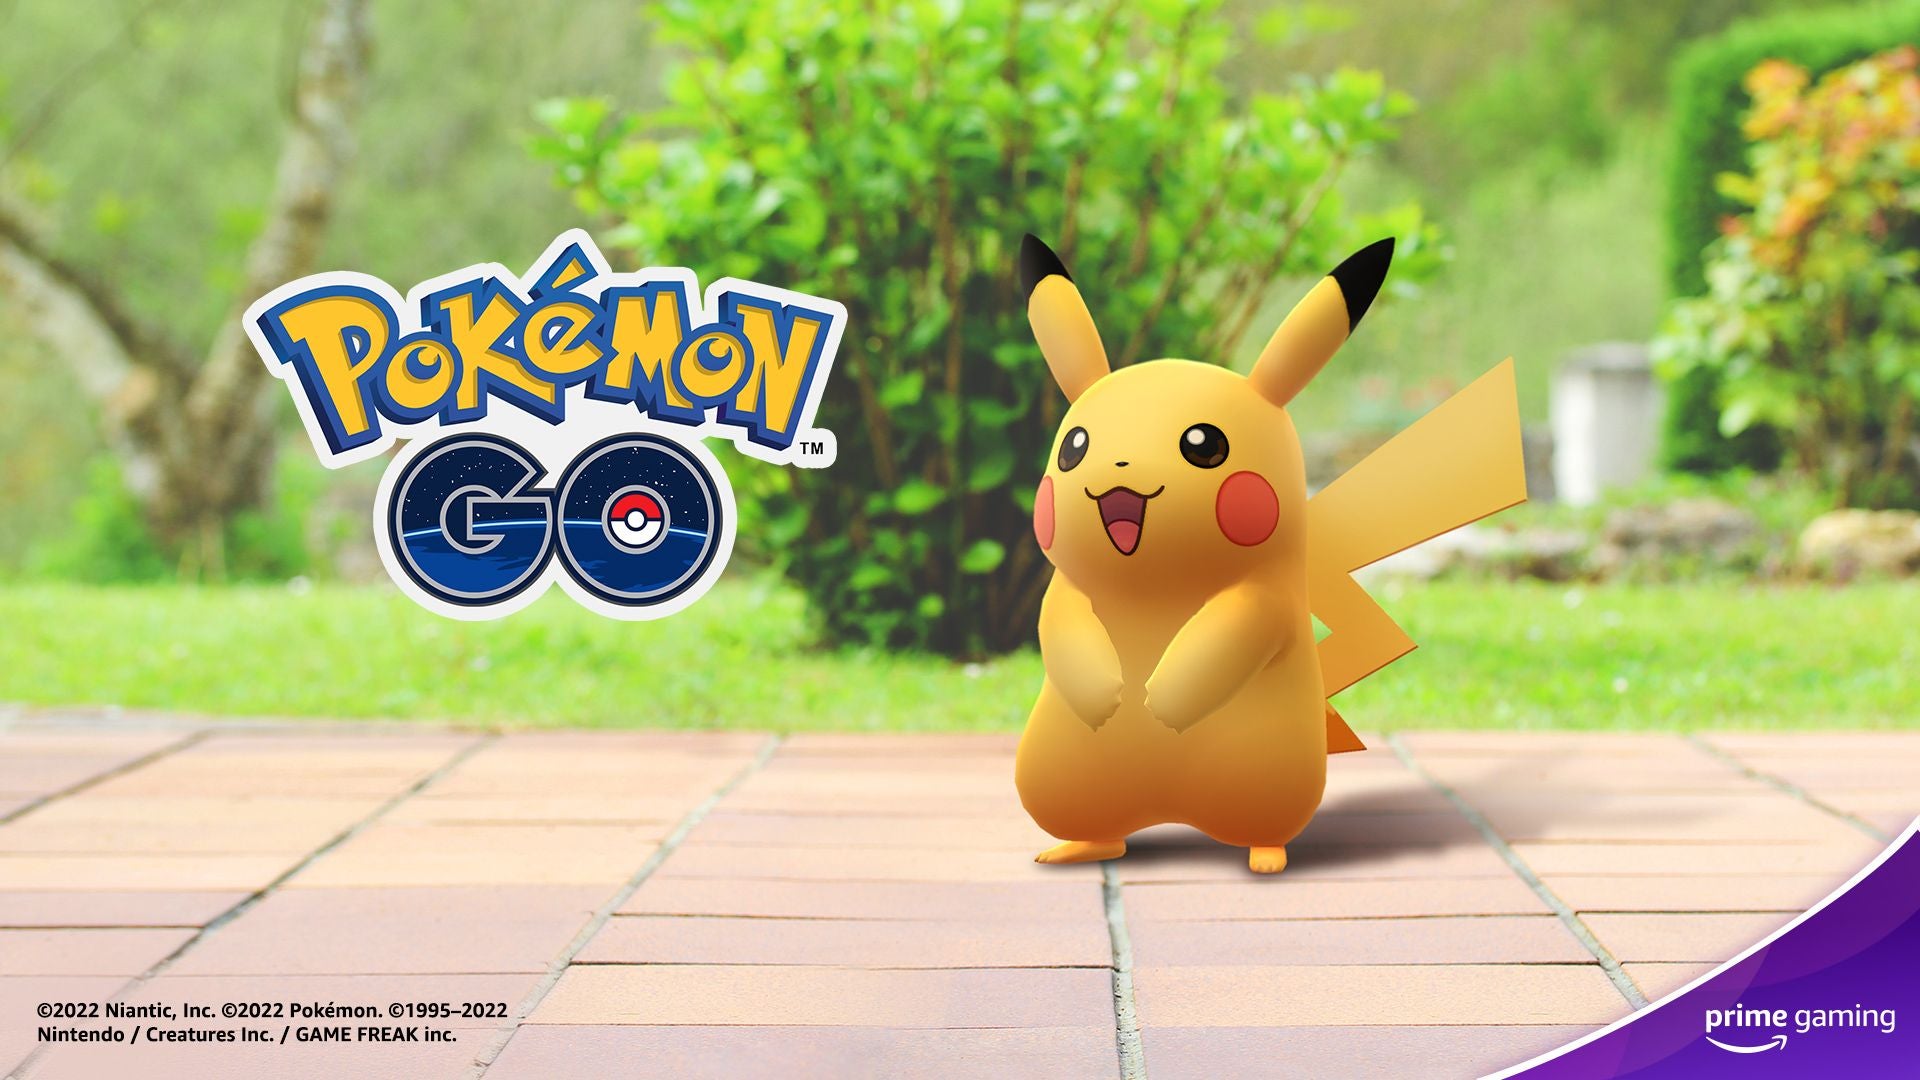 Image for Here's how Pokemon GO trainers can get exclusive bonus items from Prime Gaming